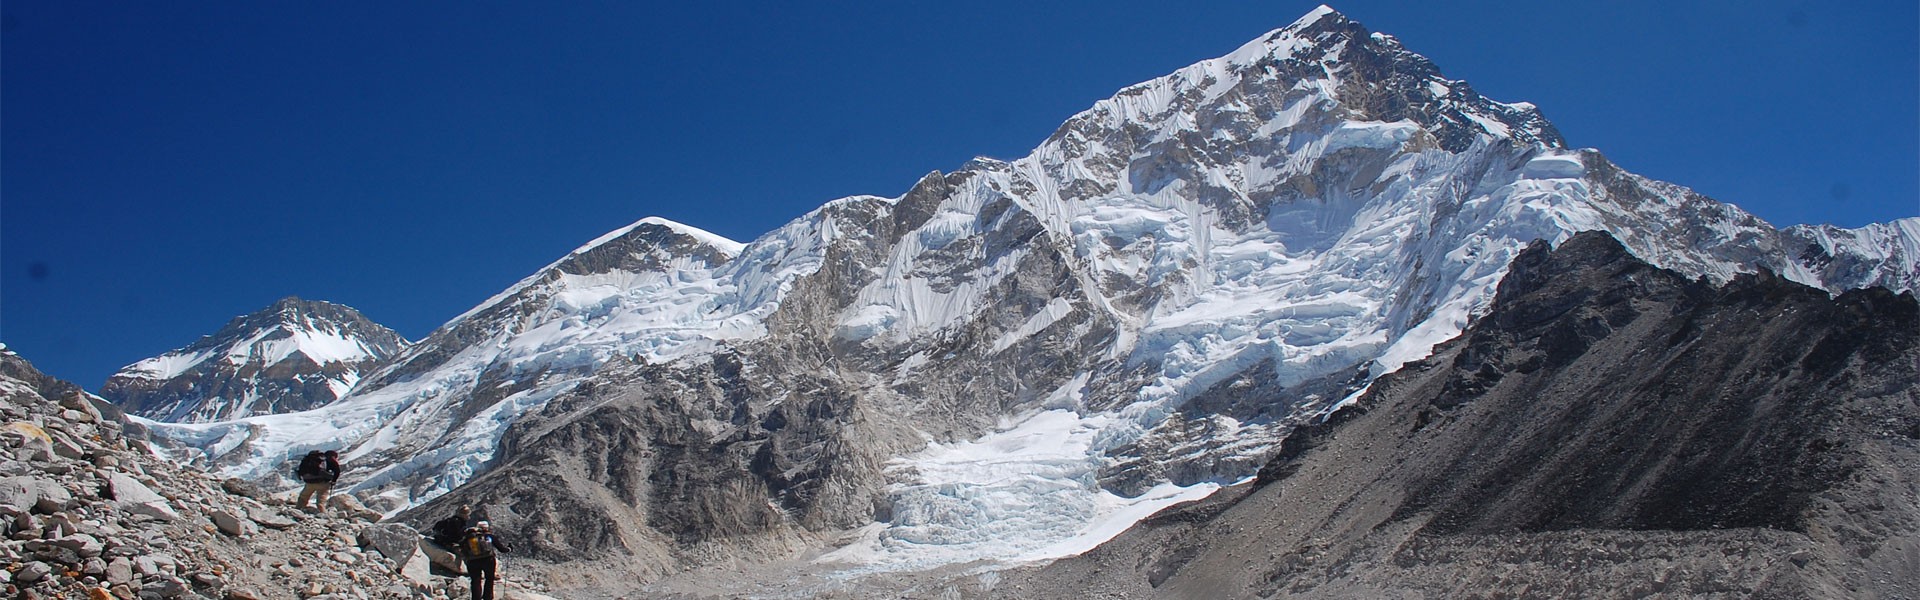 Everest View from Khumbu